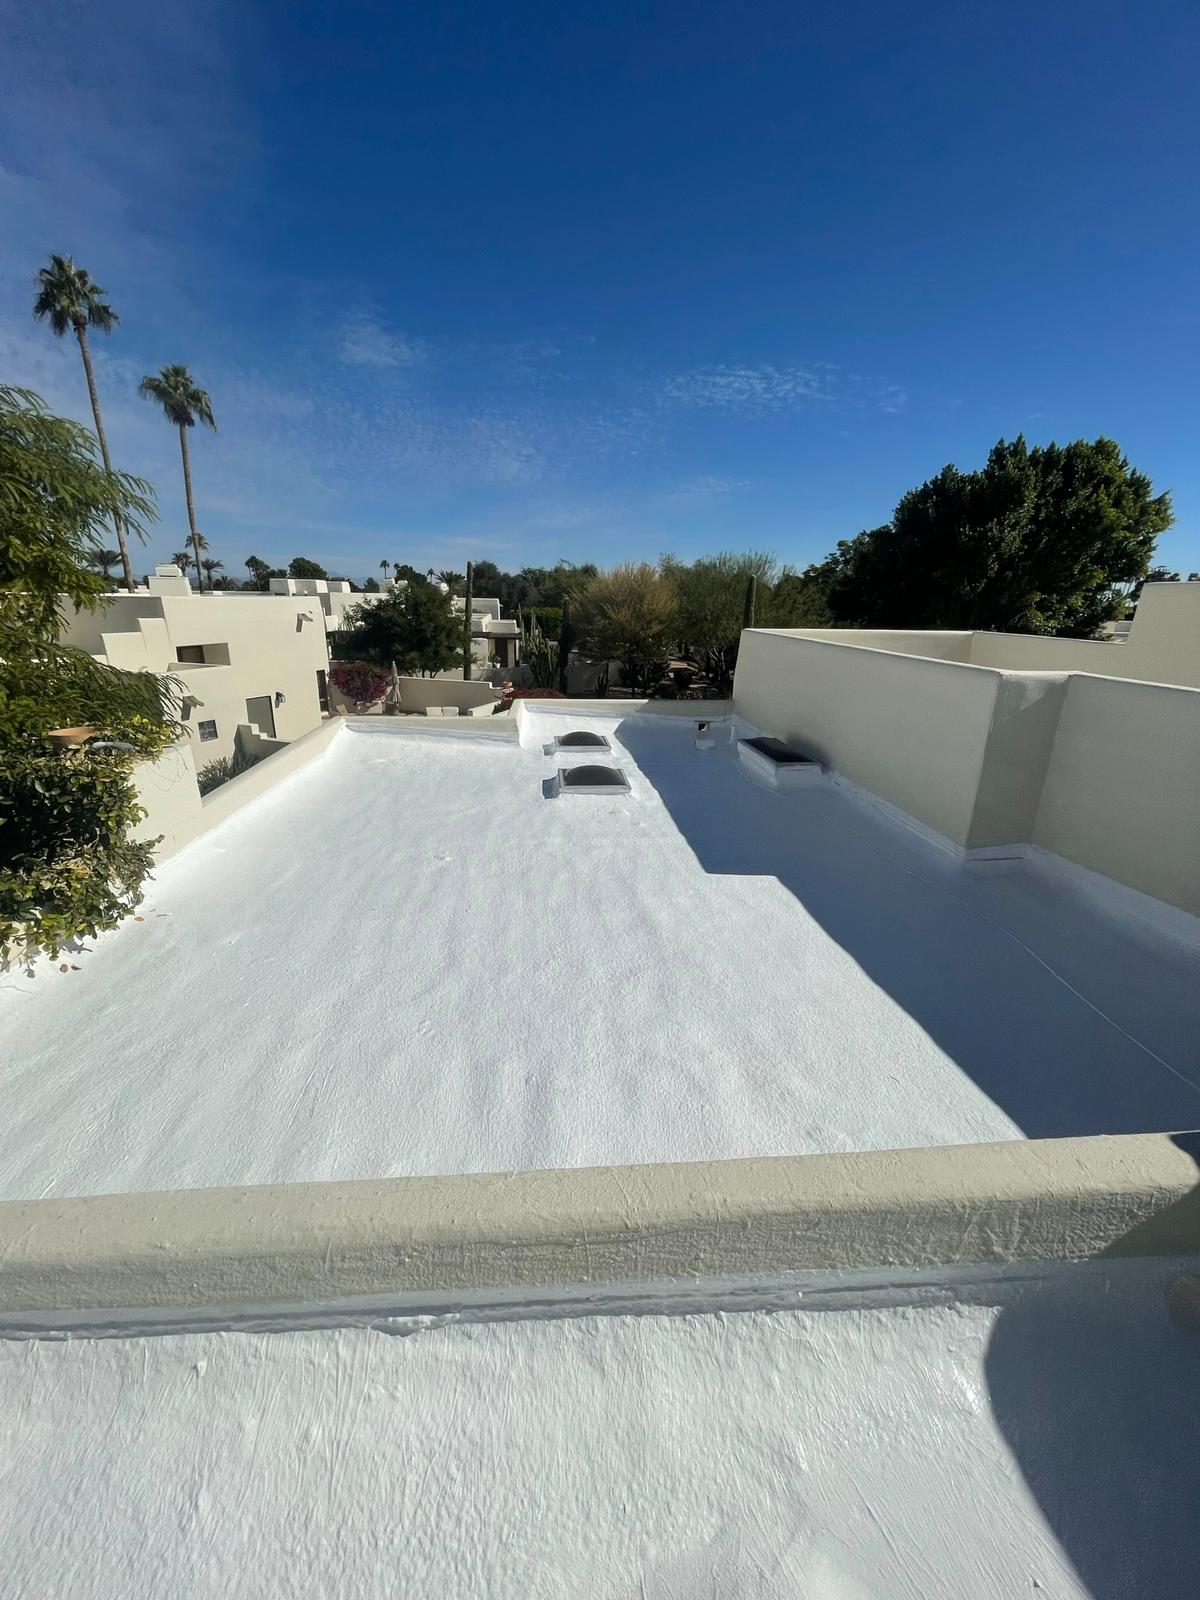 Close-up image showcasing the texture of a foam roof on a Paradise Valley home.